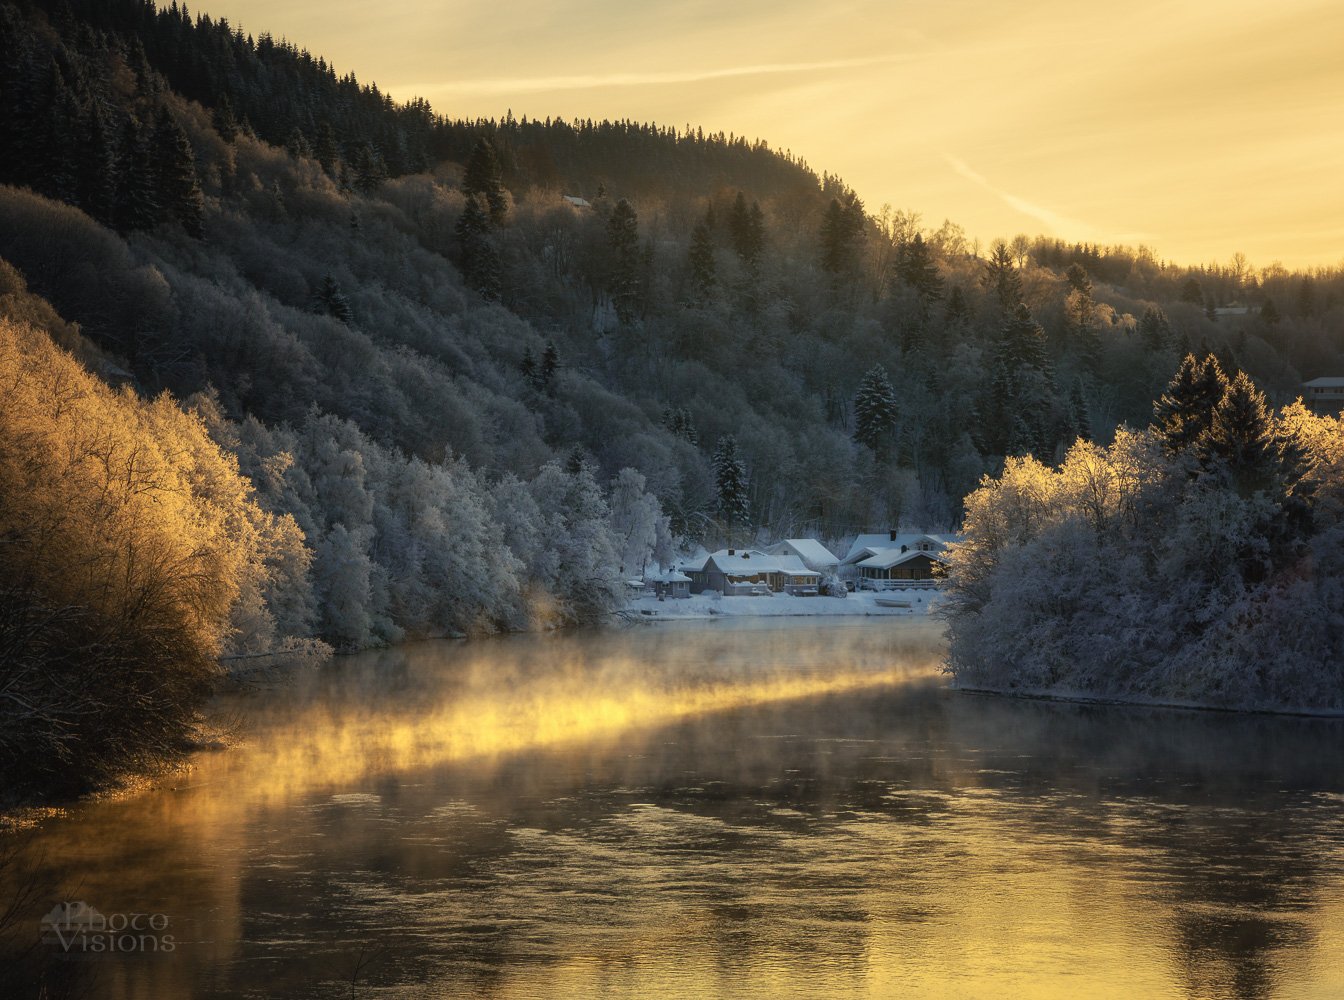 norway,winter,river,freezing,frozen,steam,forest,boreal,village, Adrian Szatewicz